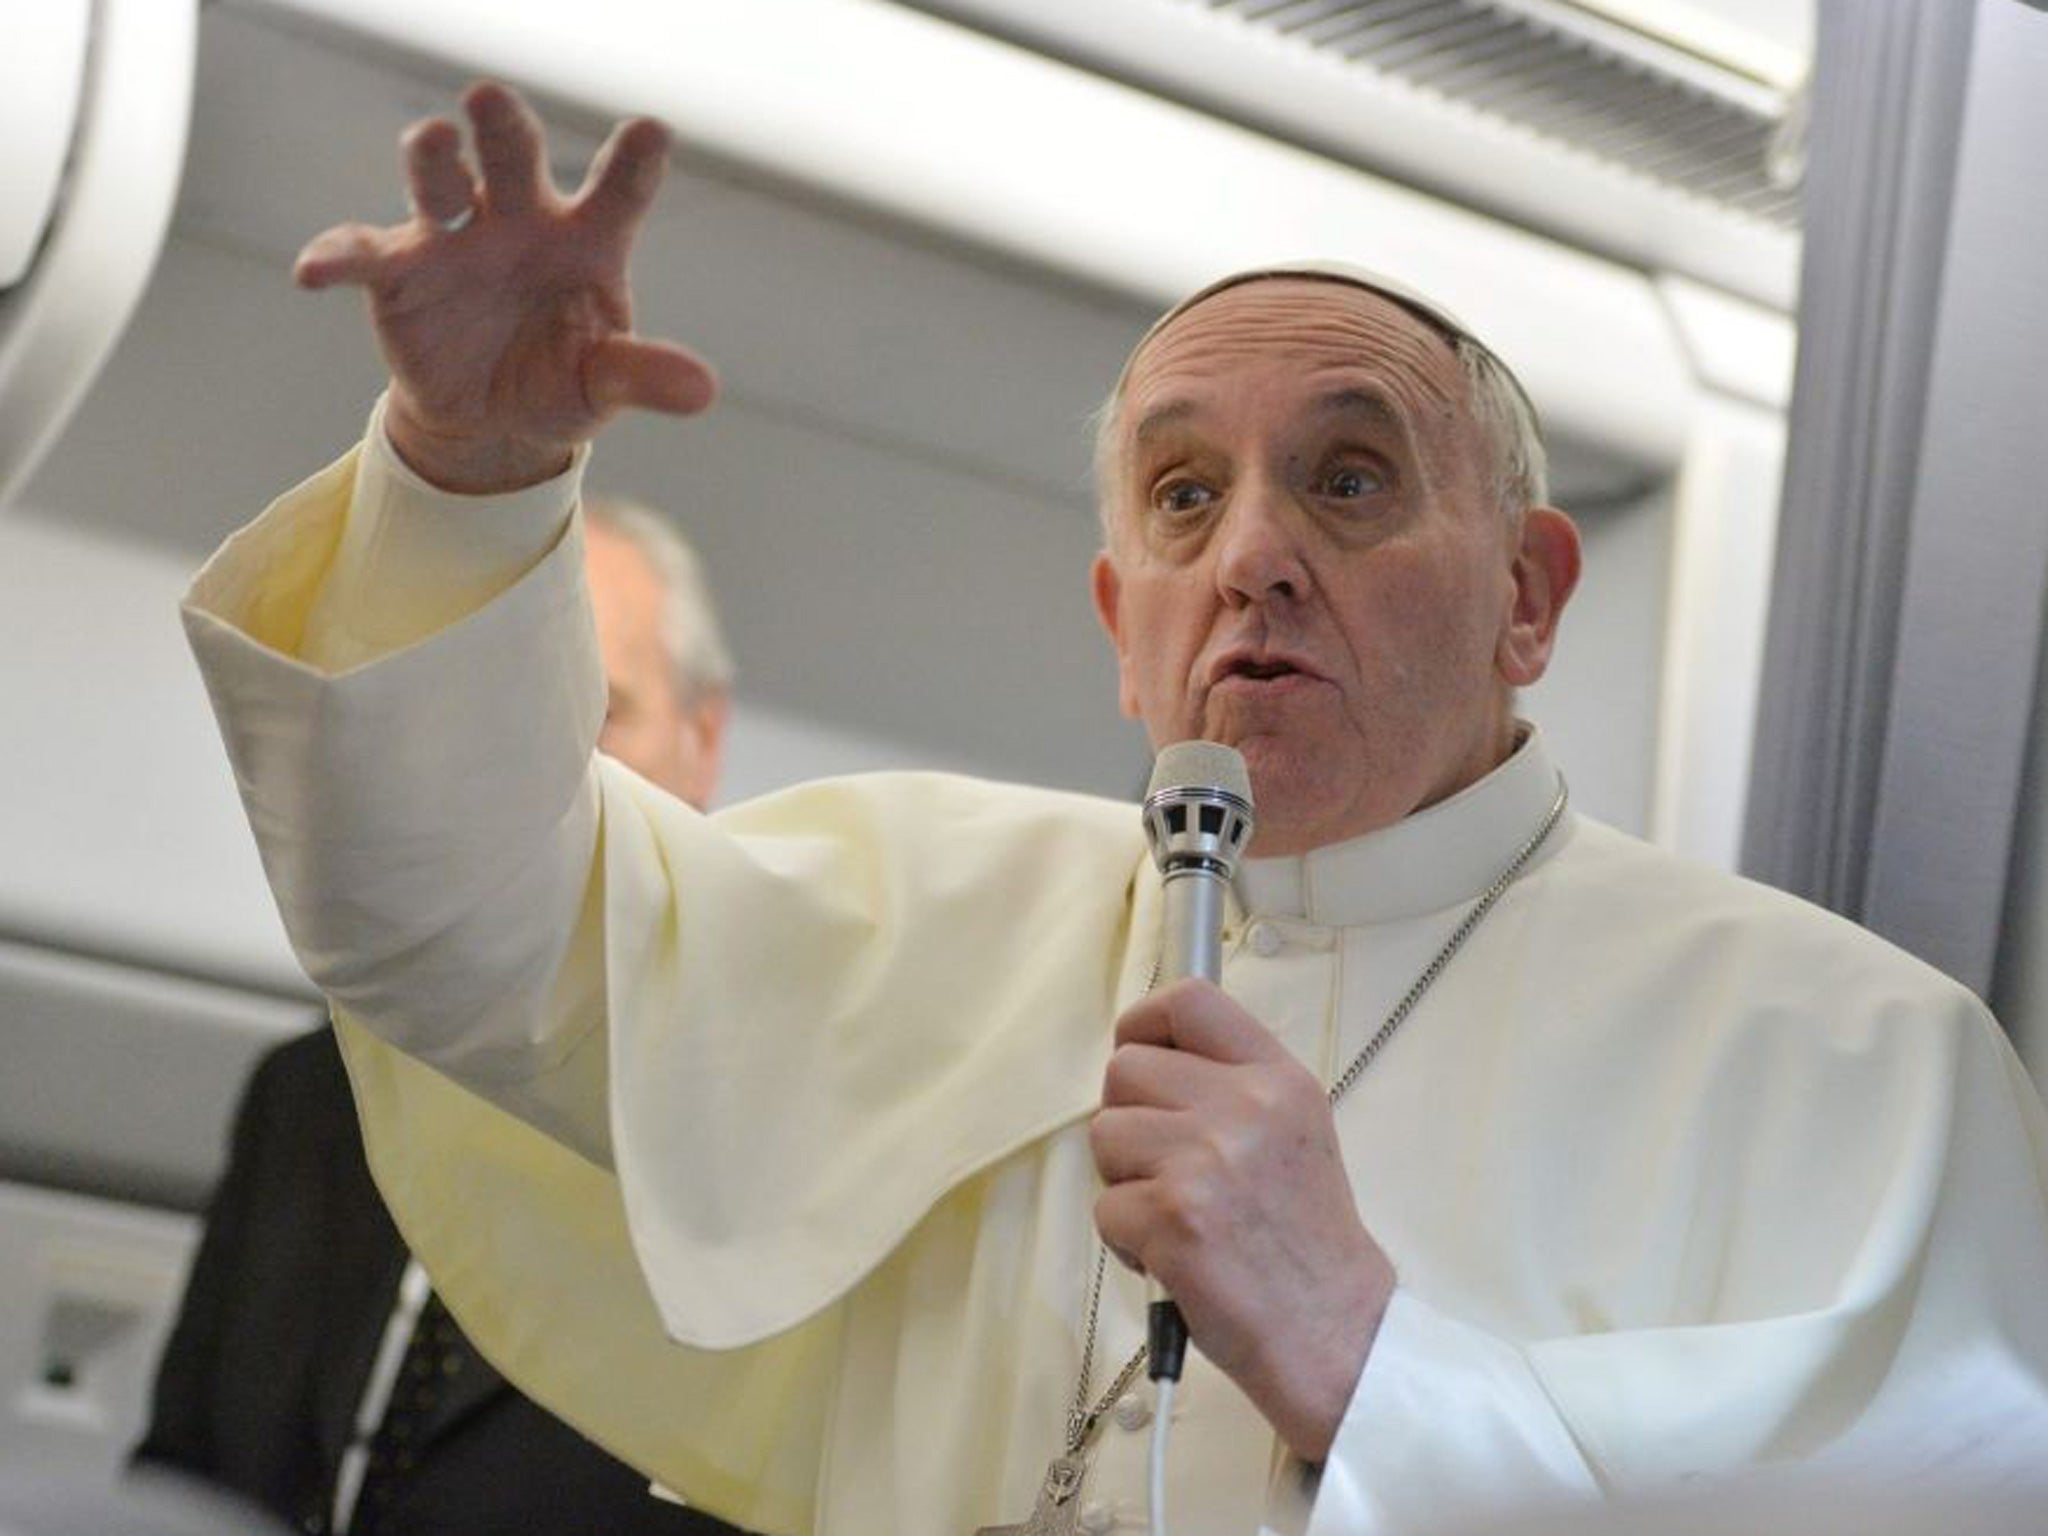 Pope Francis during a press conference on the flight back to Italy after his departure from Rio de Janeiro